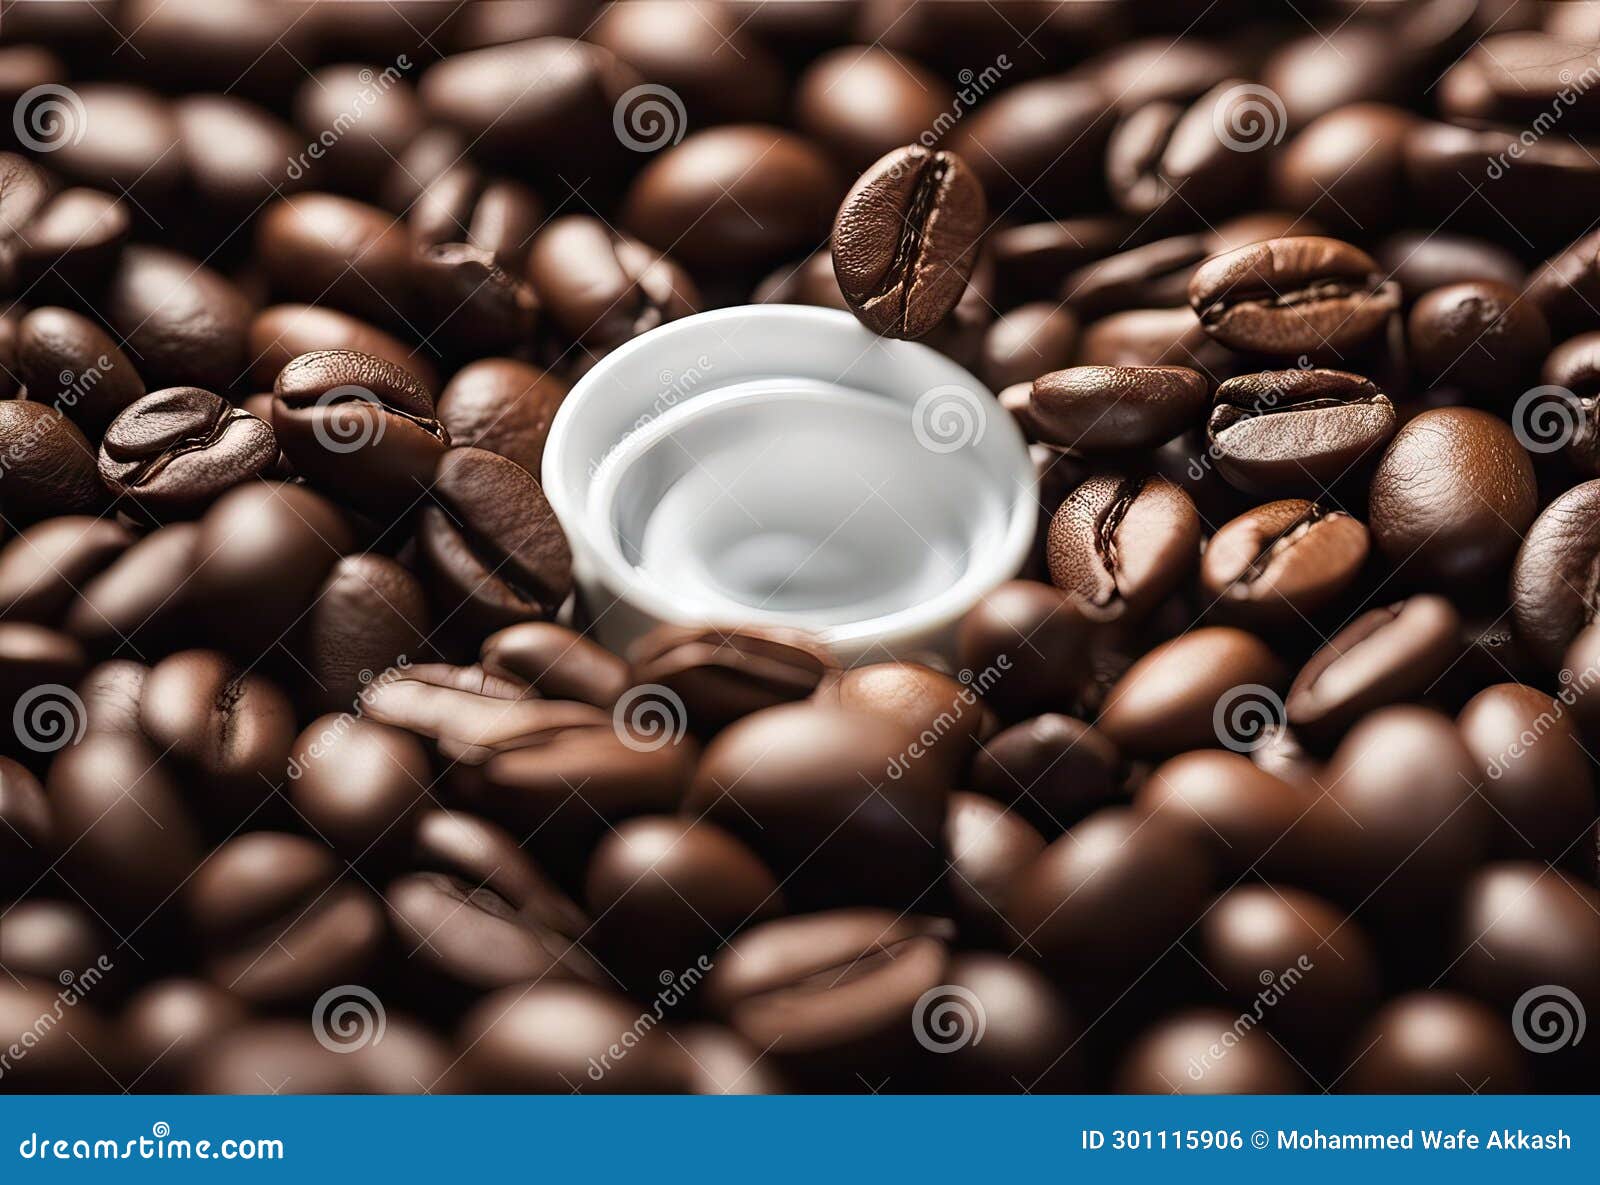 coffee bean stock photoroasted bean, raw backgrounds, cafe, textured